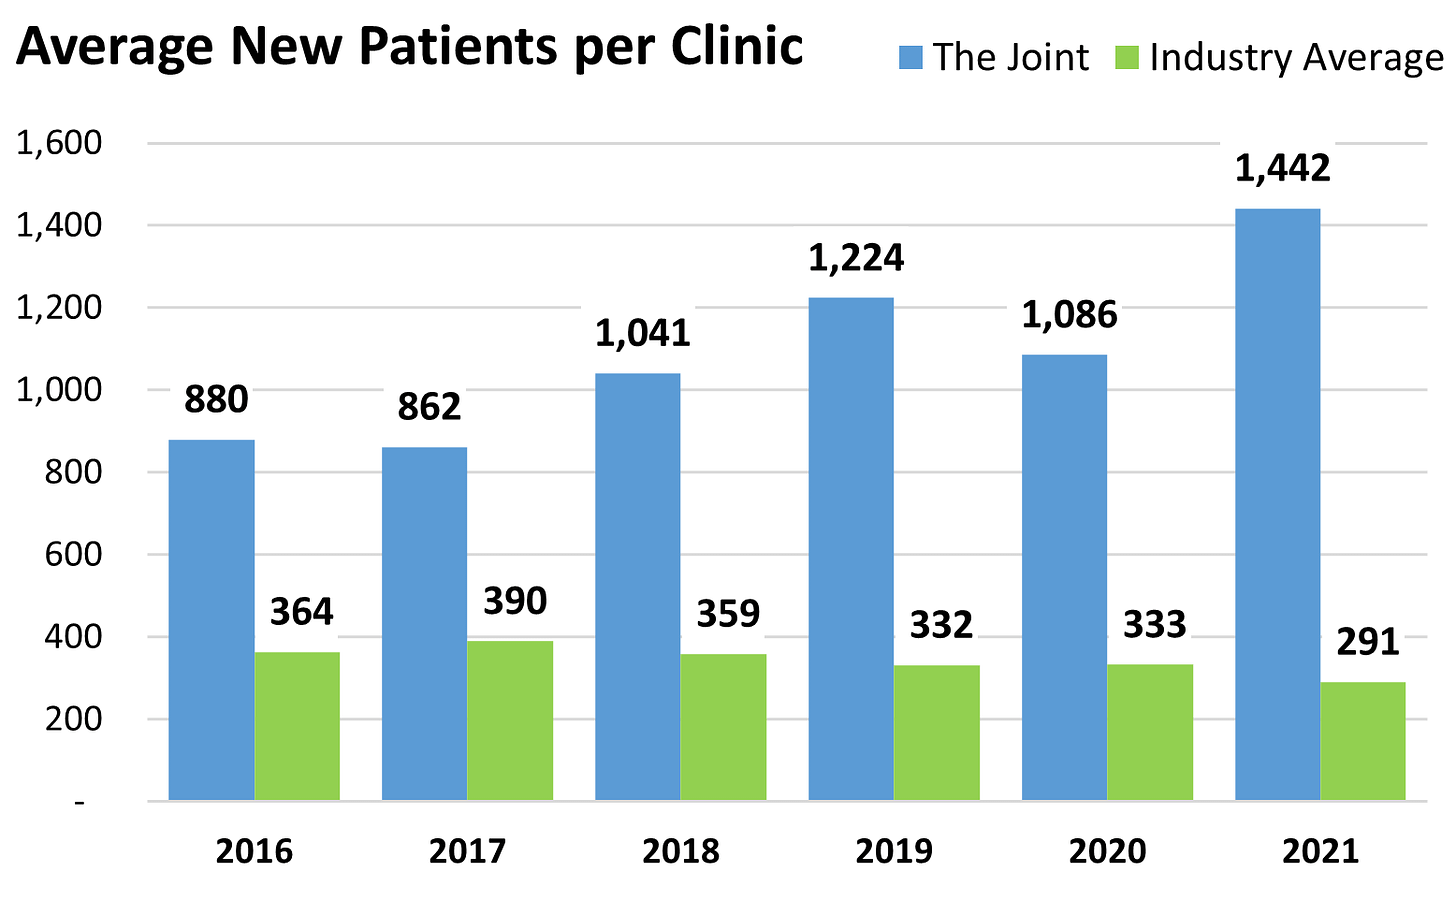 The Joint Average New Patients versus Industry